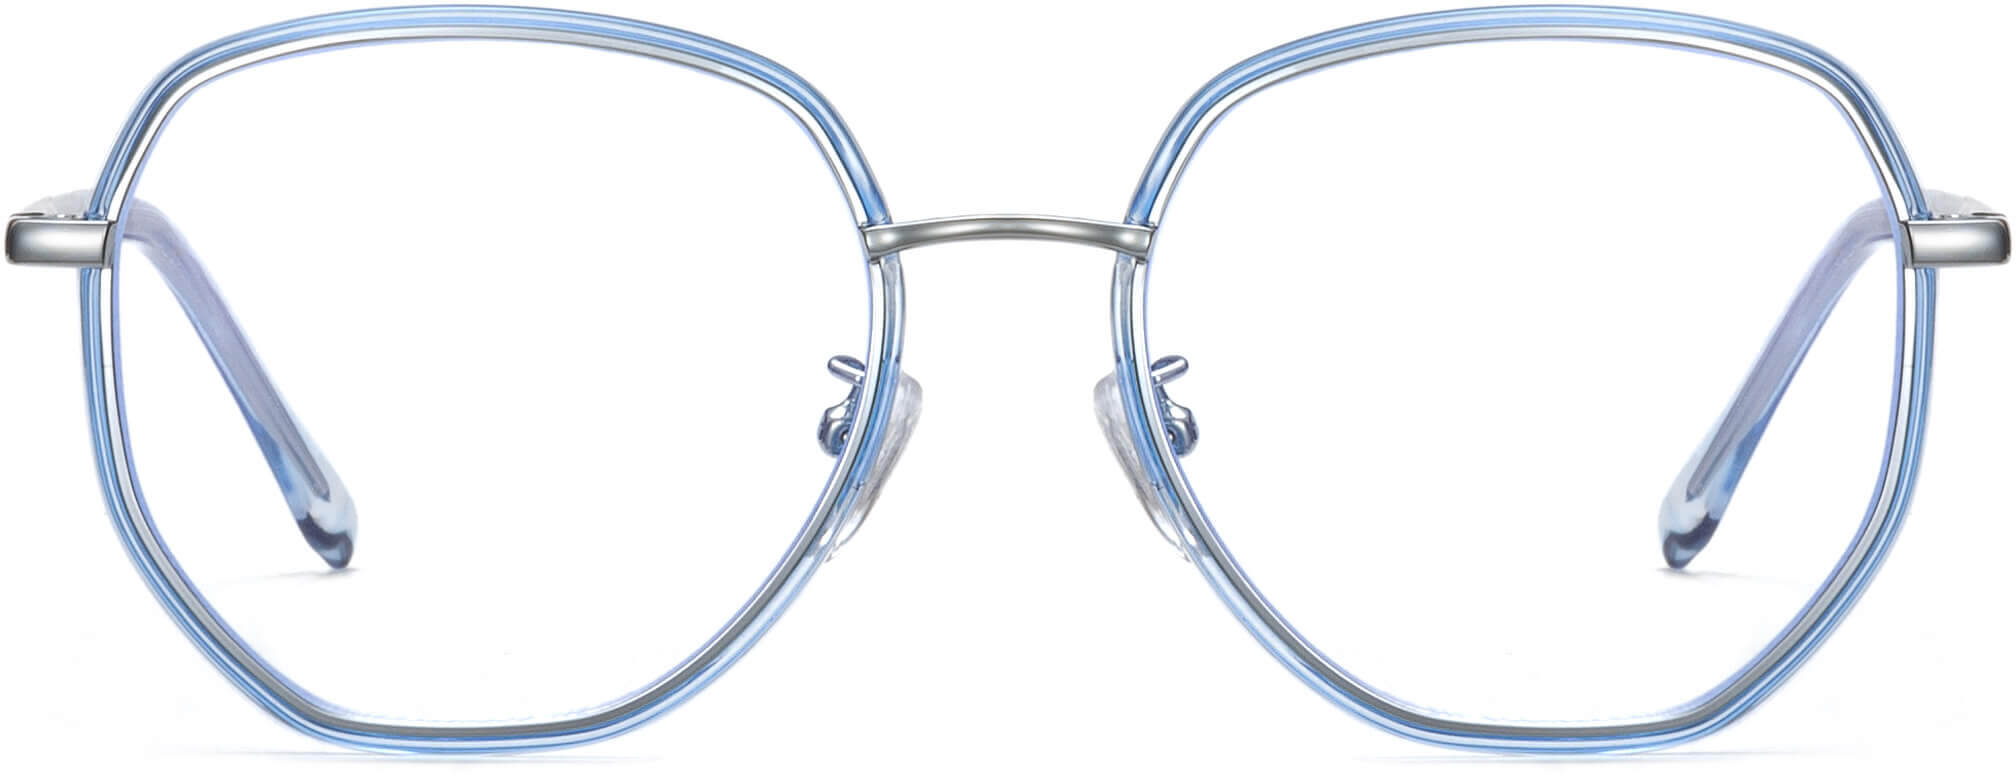 Blaine Clear Blue Metal Eyeglasses from ANRRI, Front View